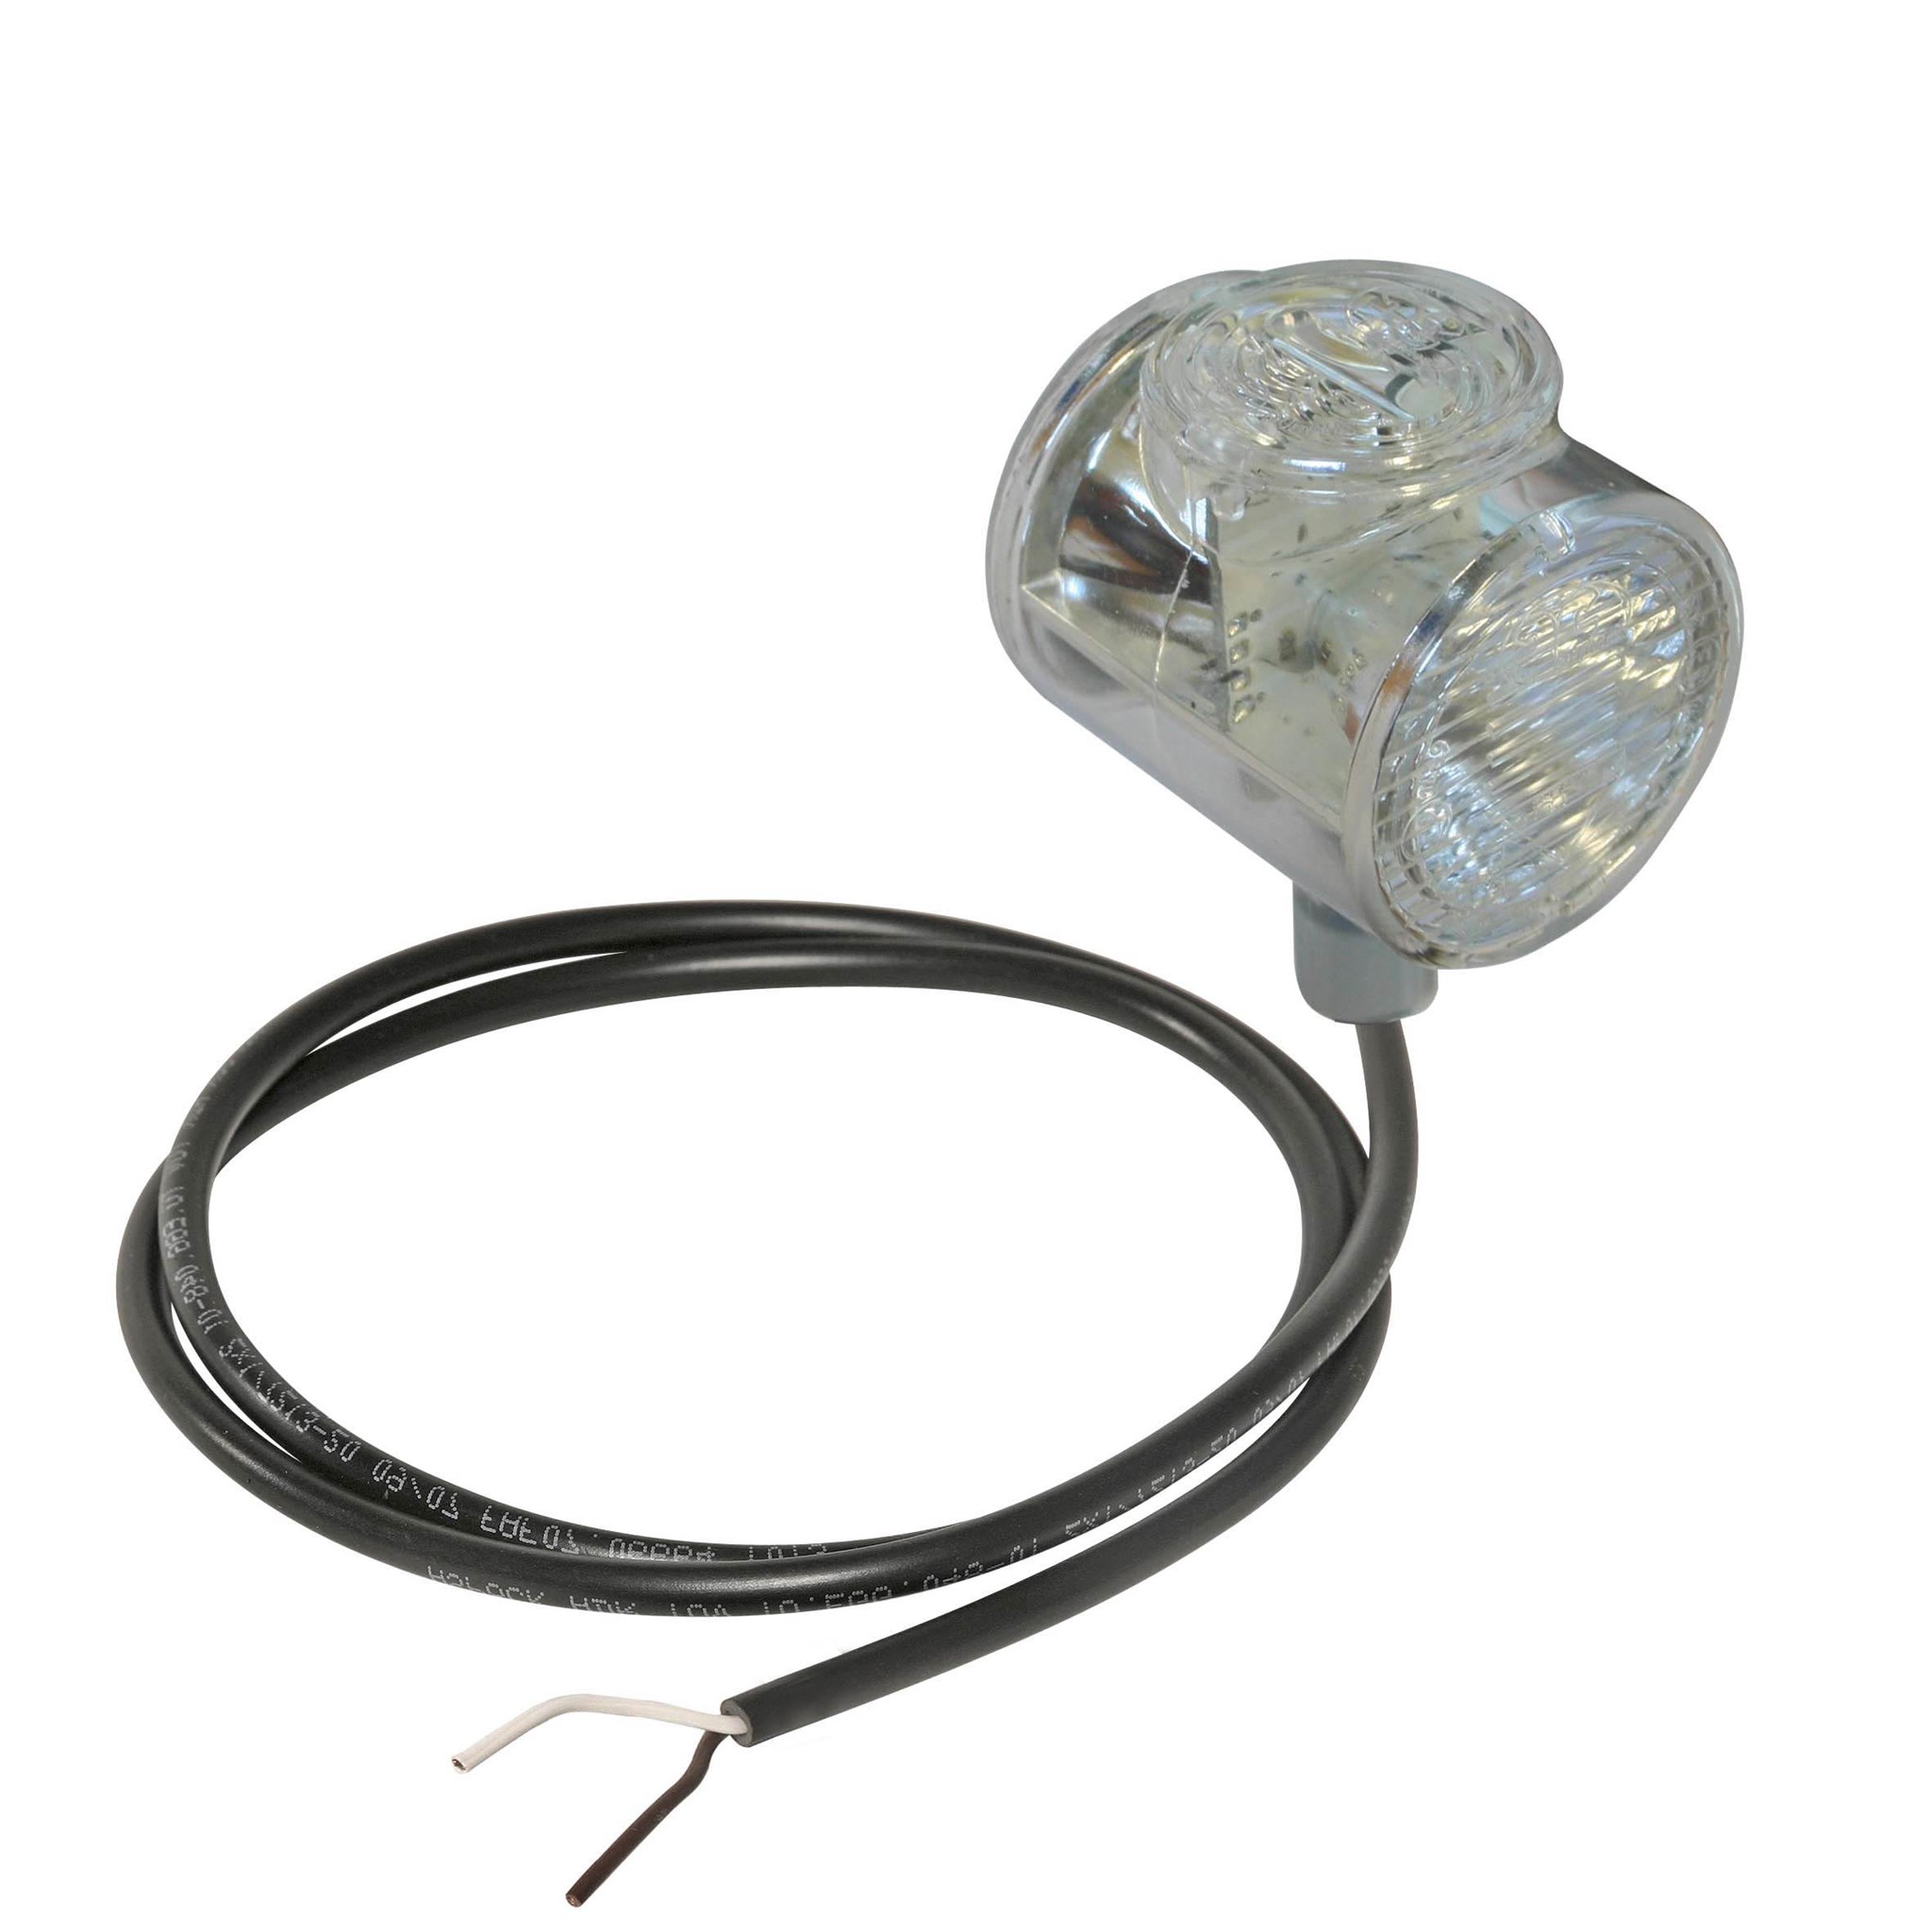 Picture of 21-3353-707 Aspöck Superpoint III LED Einsatz r/w/o 1,5m Kabel Open End